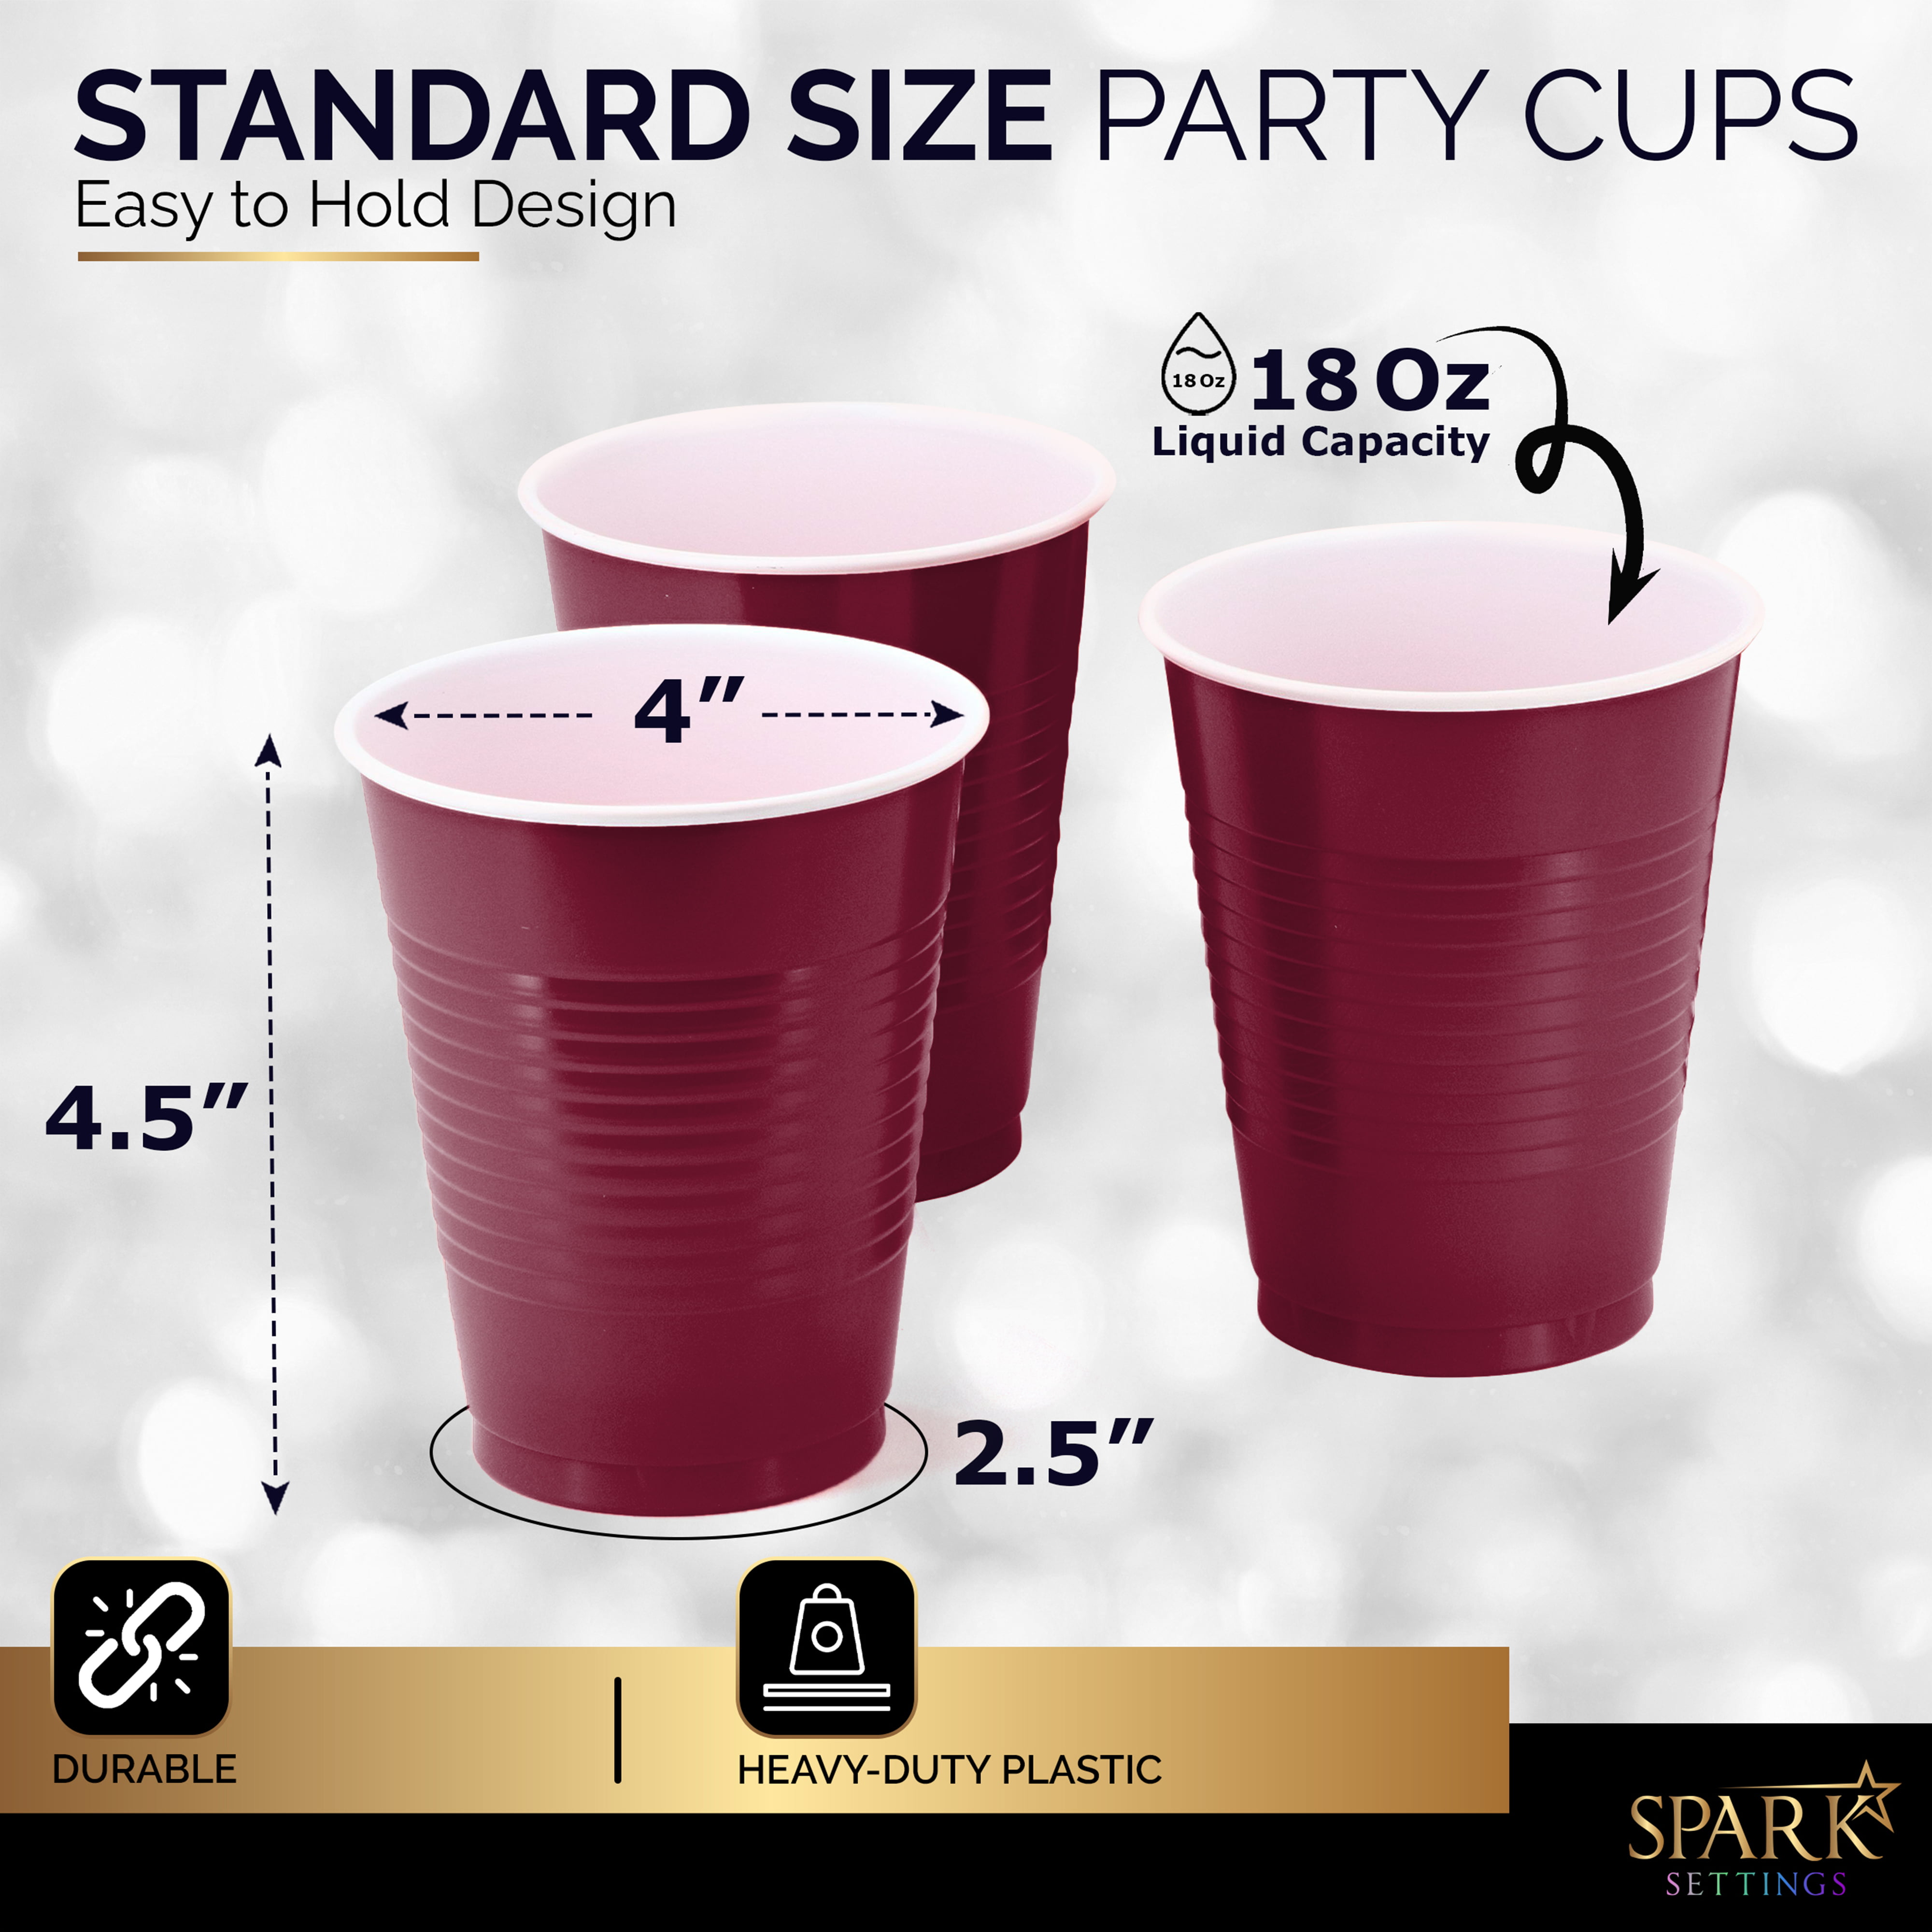 RW Base 16 Ounce Party Cups, 500 Disposable Cups - Heavy Duty, Durable, Gray Plastic Beverage Glasses, for Birthday Parties, Weddings, Picnics, or Tai